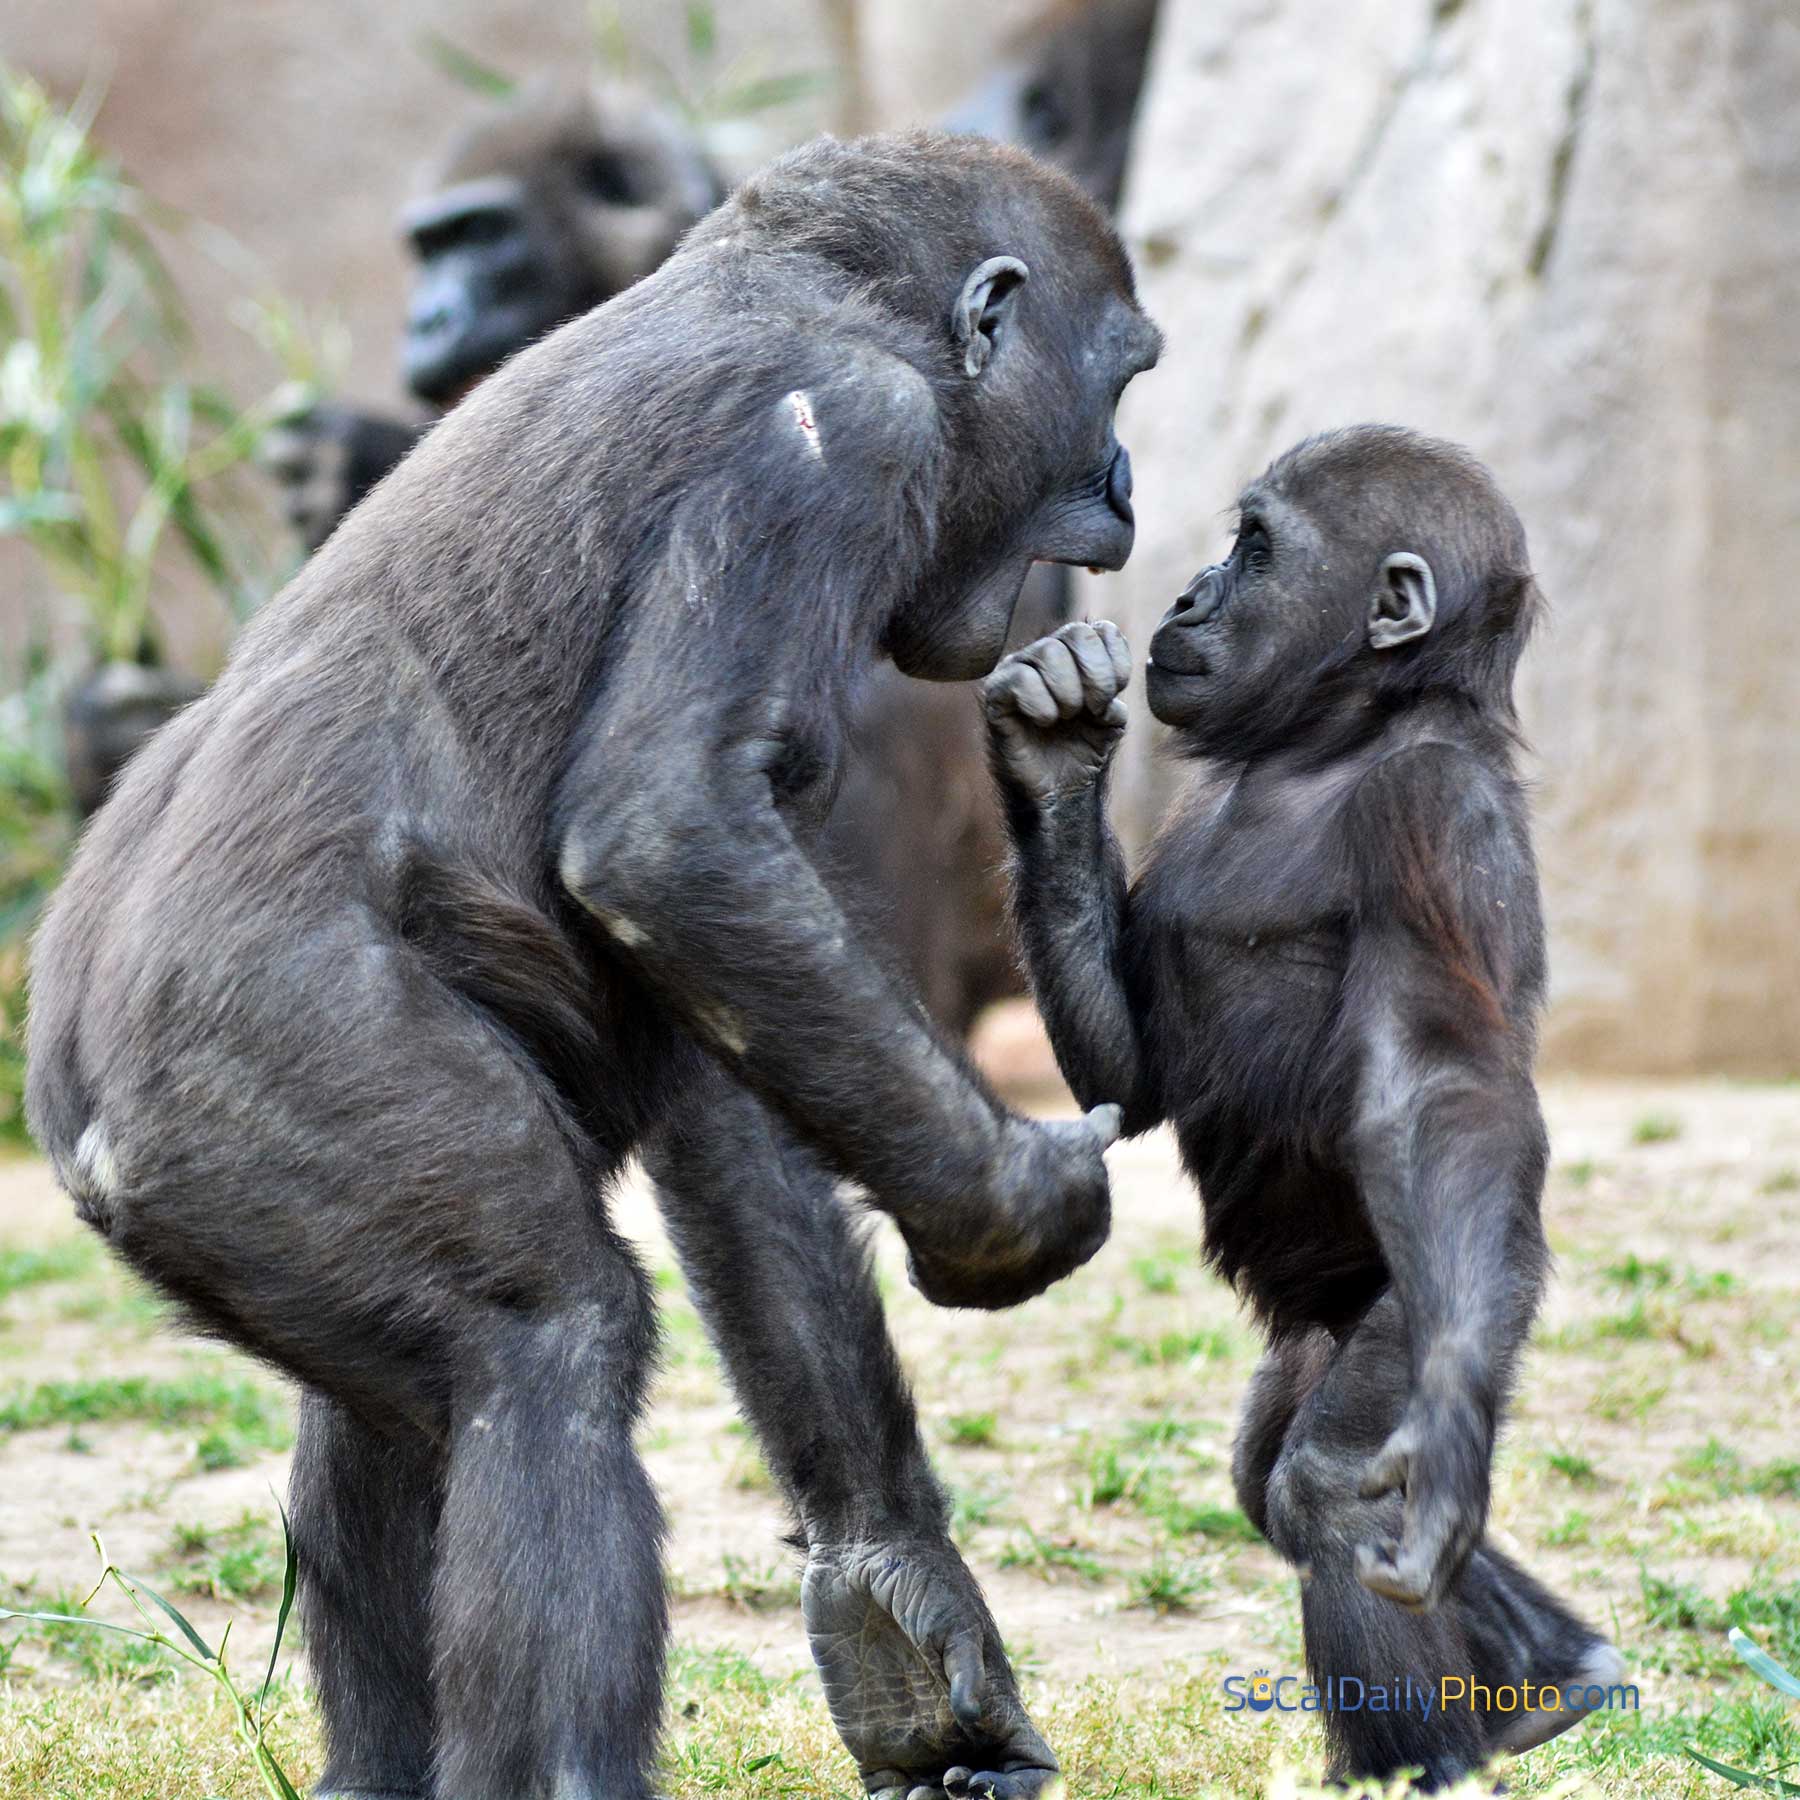 Baby gorilla stands up to a bigger gorilla